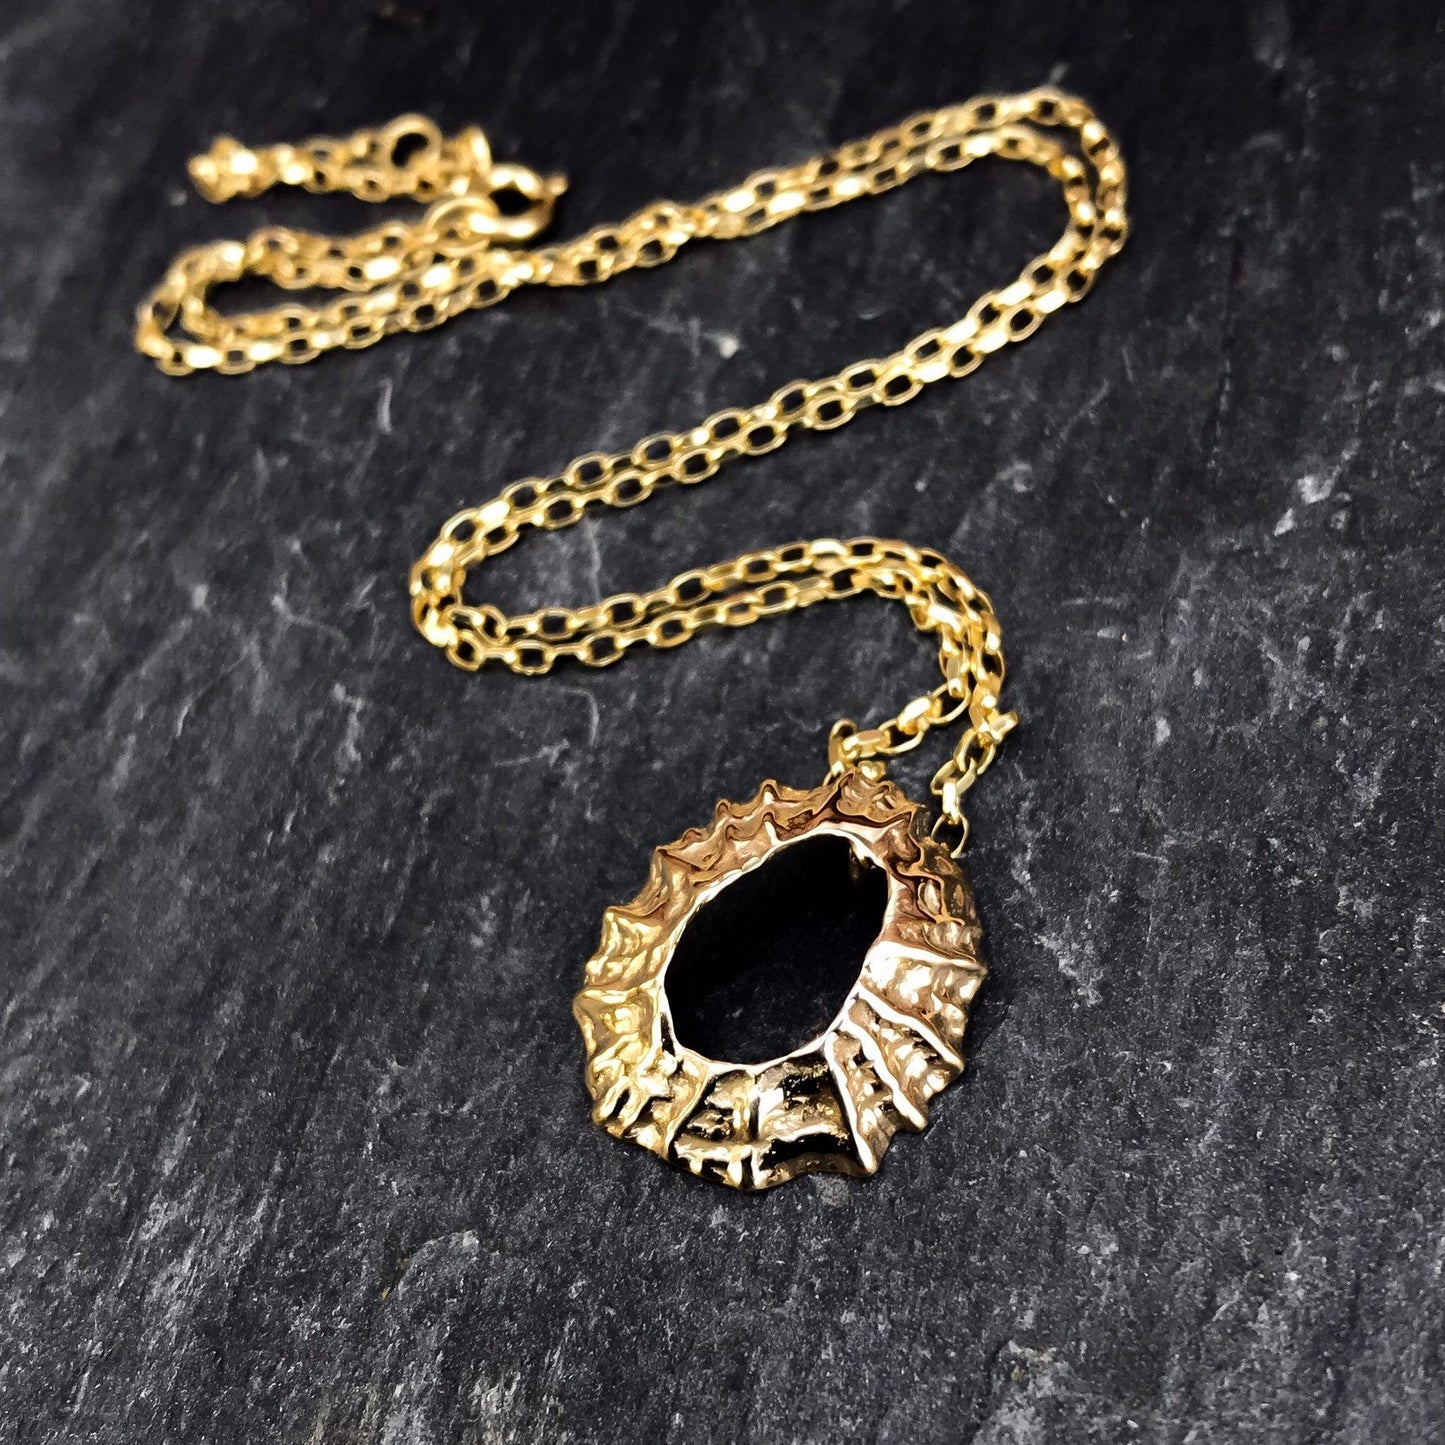 Gold Limpet Shell 'Manx Flitter' Necklace